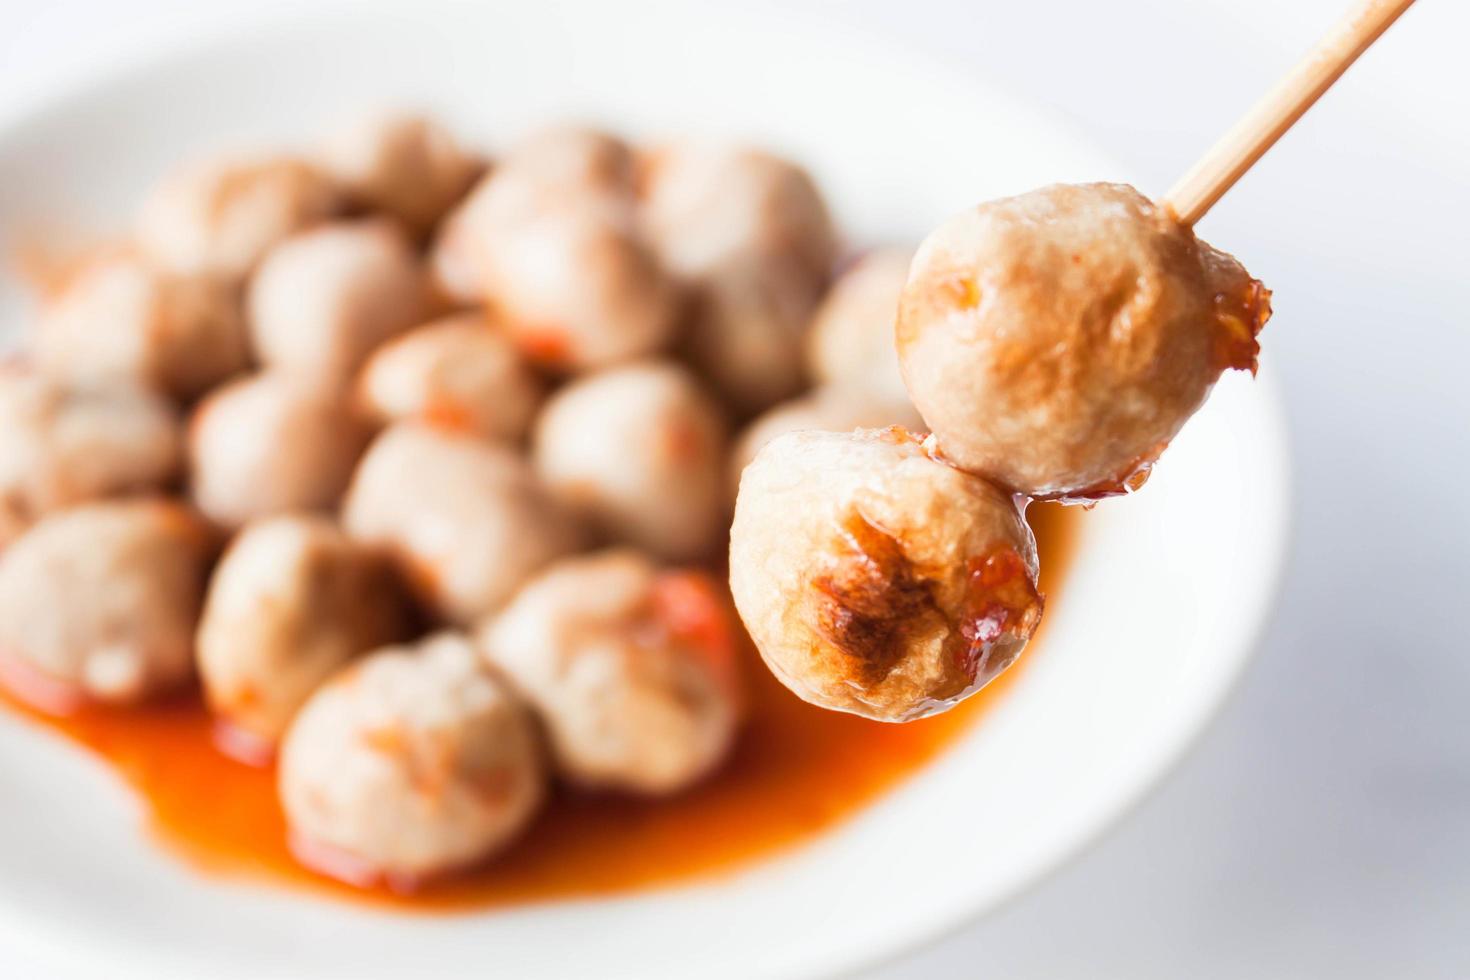 Pork meatballs dipped in sauce photo